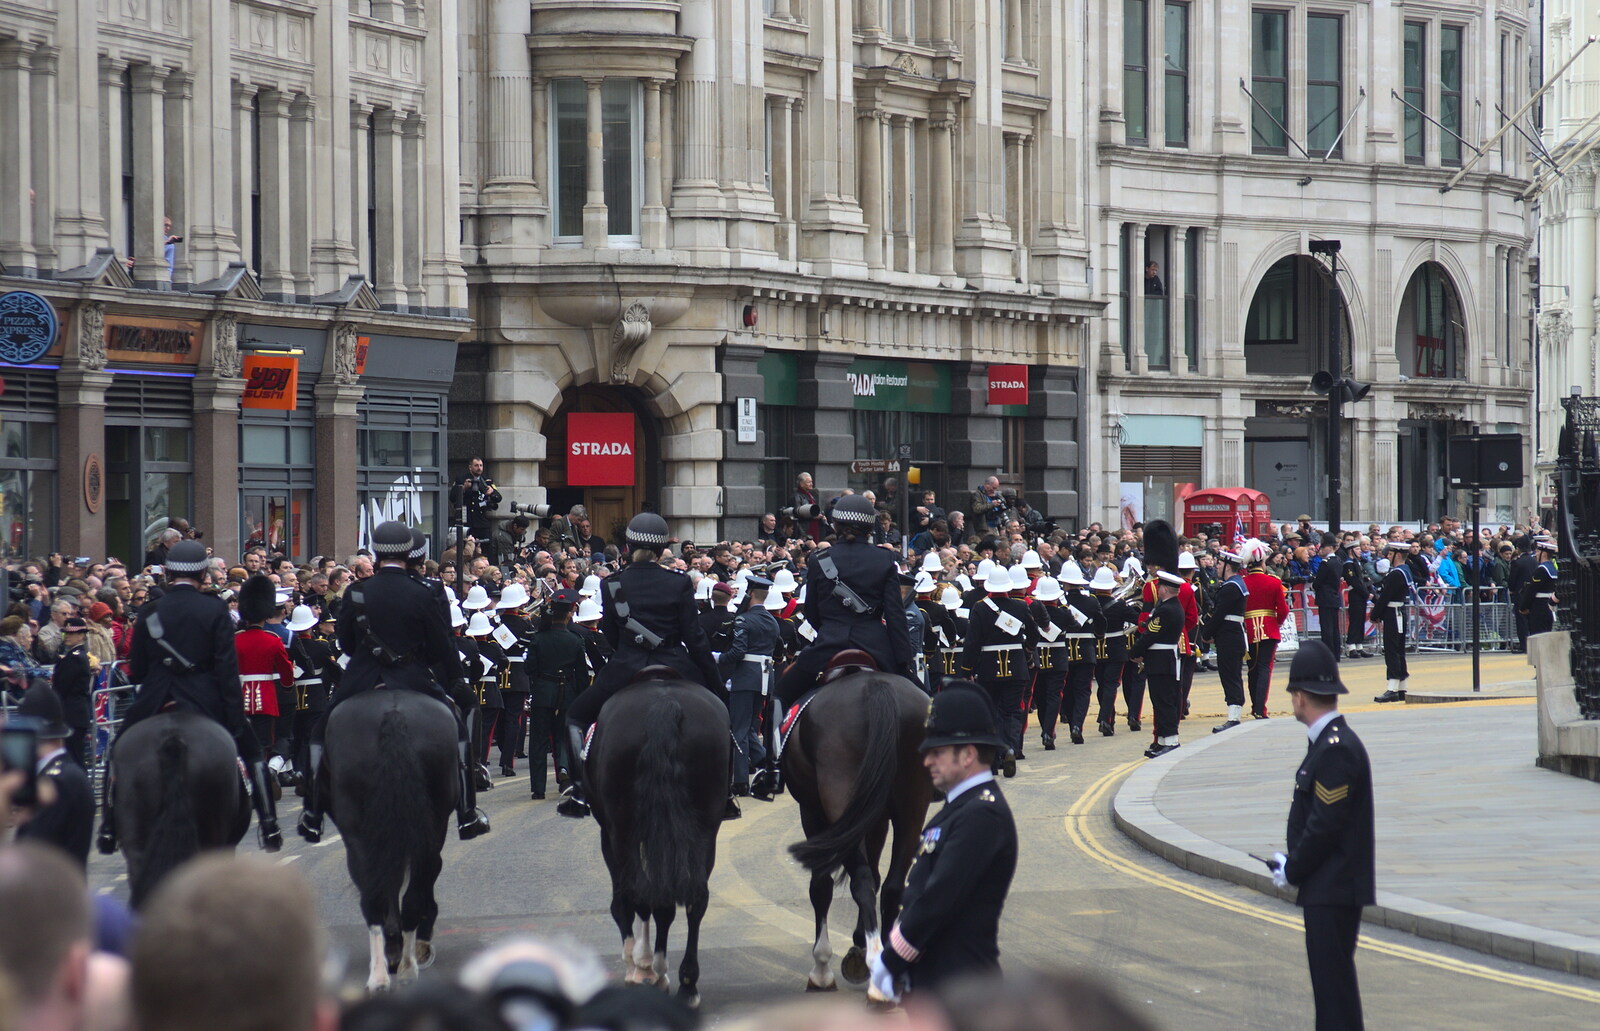 The band heads back down St. Paul's Churchyard from Margaret Thatcher's Funeral, St. Paul's, London - 17th April 2013